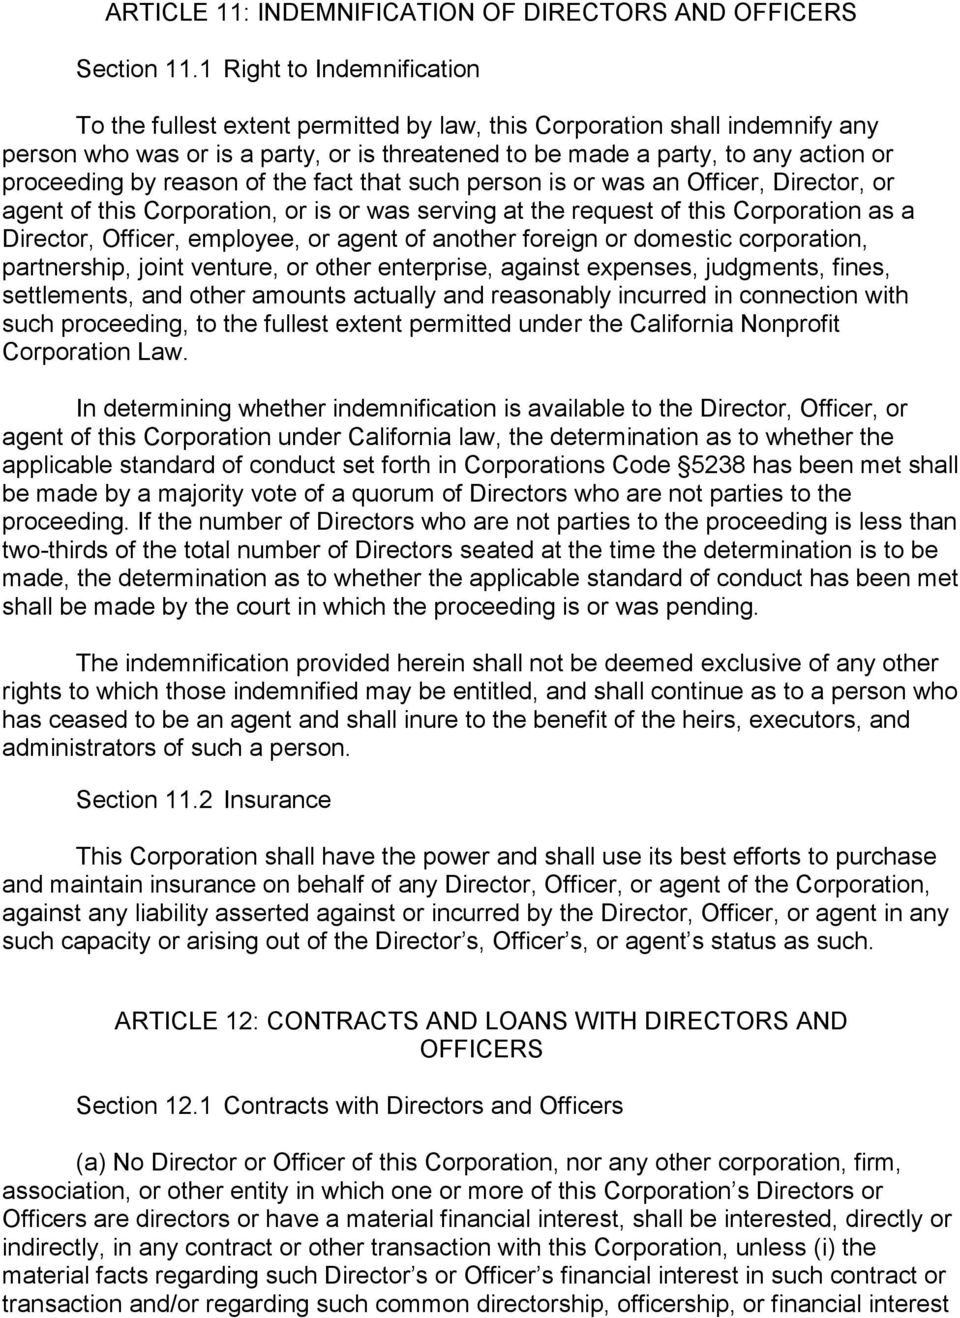 by reason of the fact that such person is or was an Officer, Director, or agent of this Corporation, or is or was serving at the request of this Corporation as a Director, Officer, employee, or agent